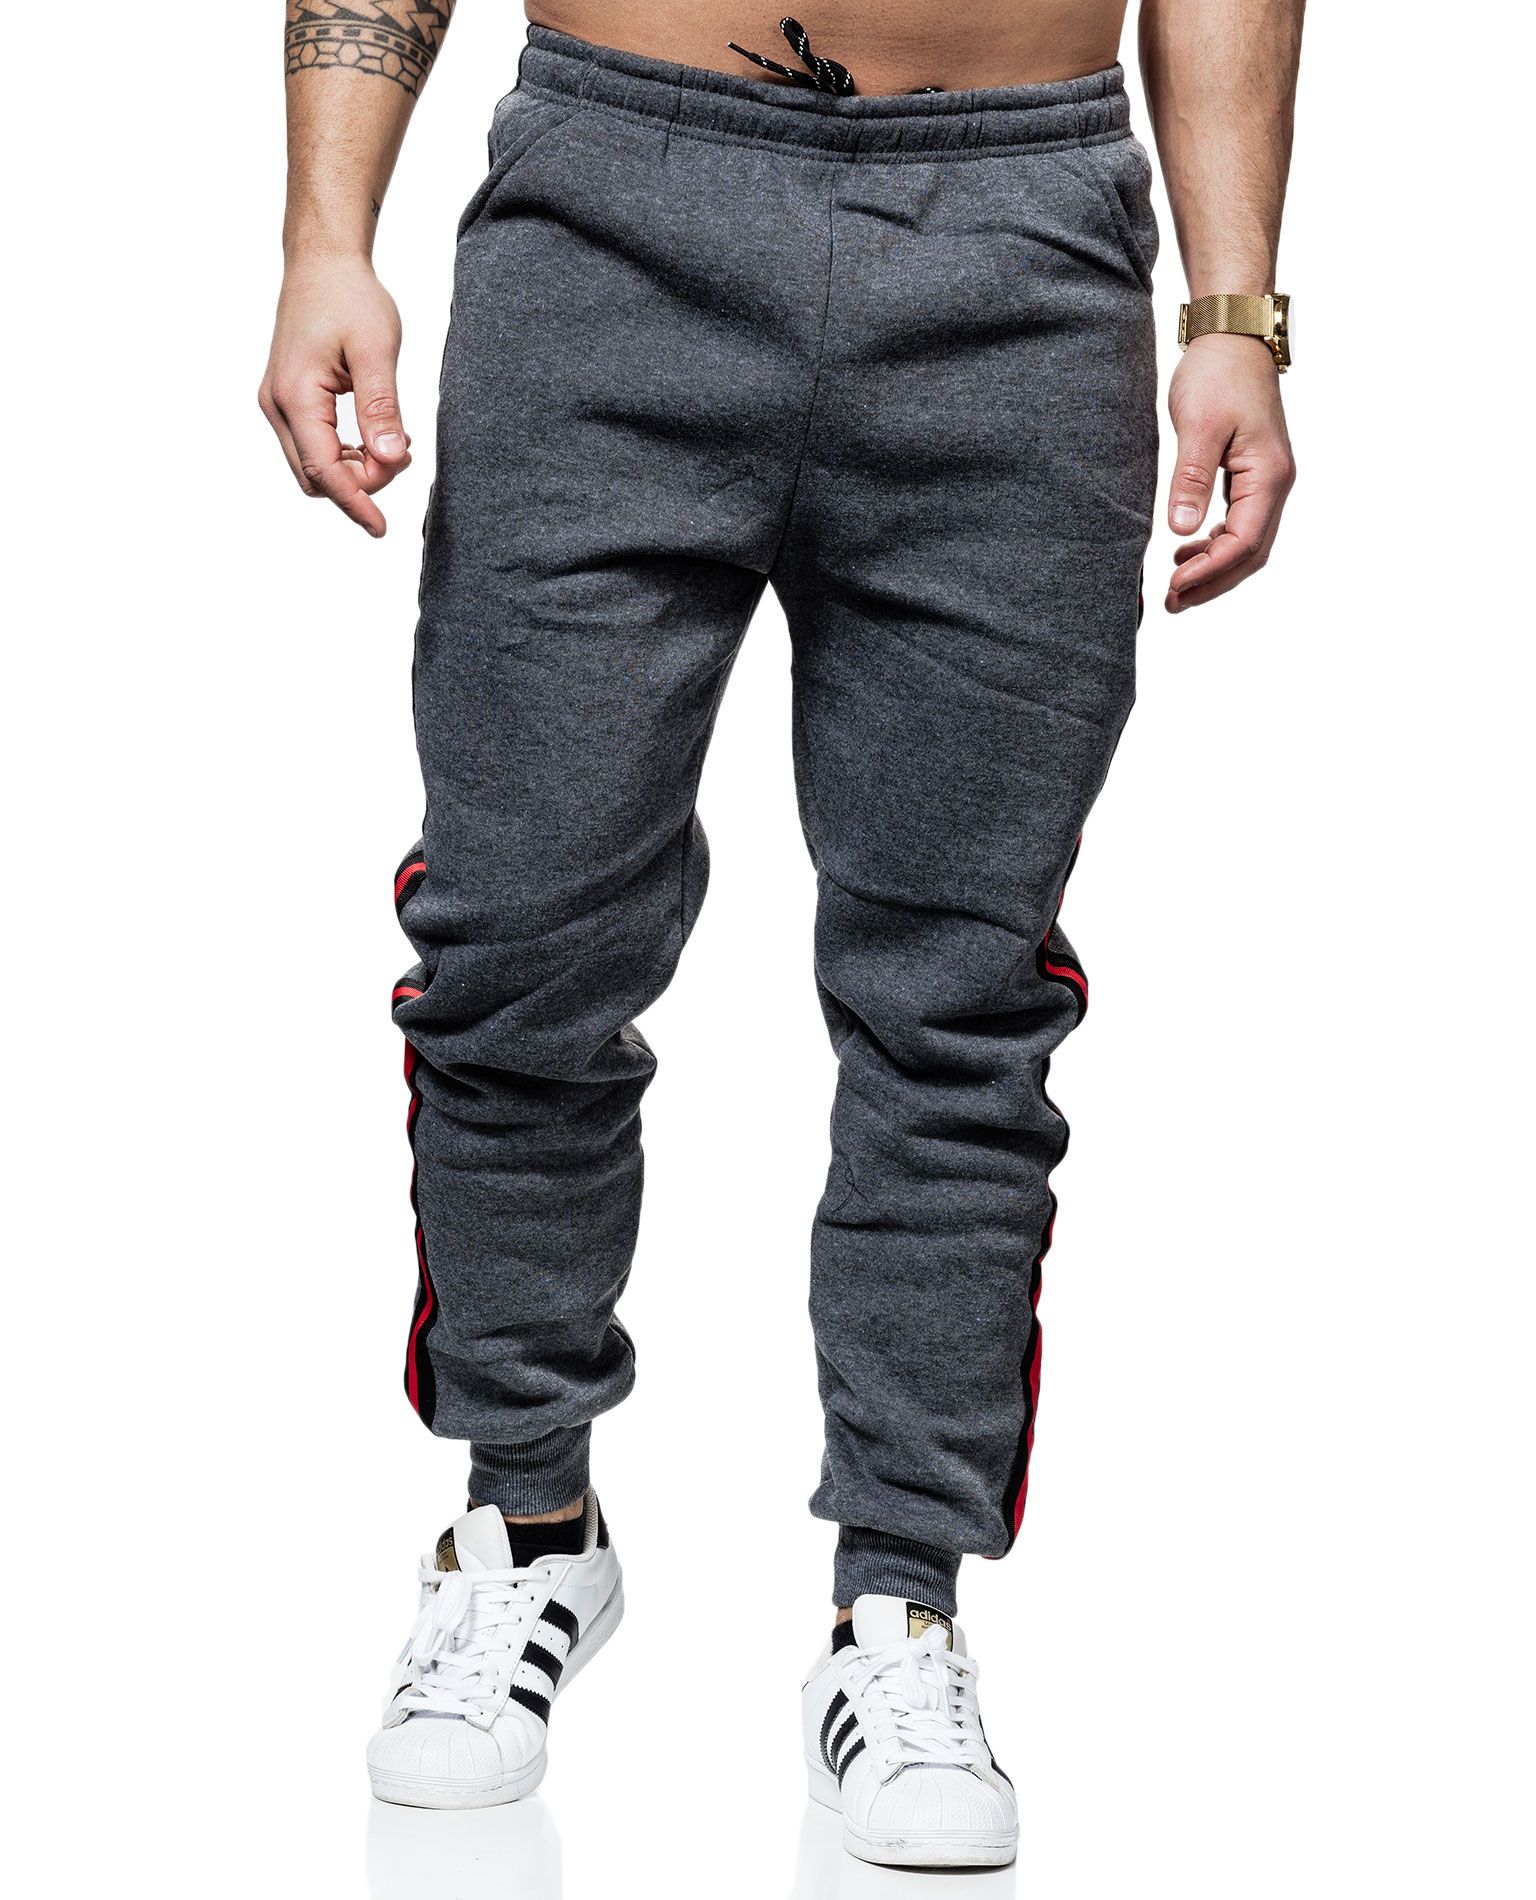 Striped College Pants Gray Jerone - 3018 - Trousers - Jerone.com